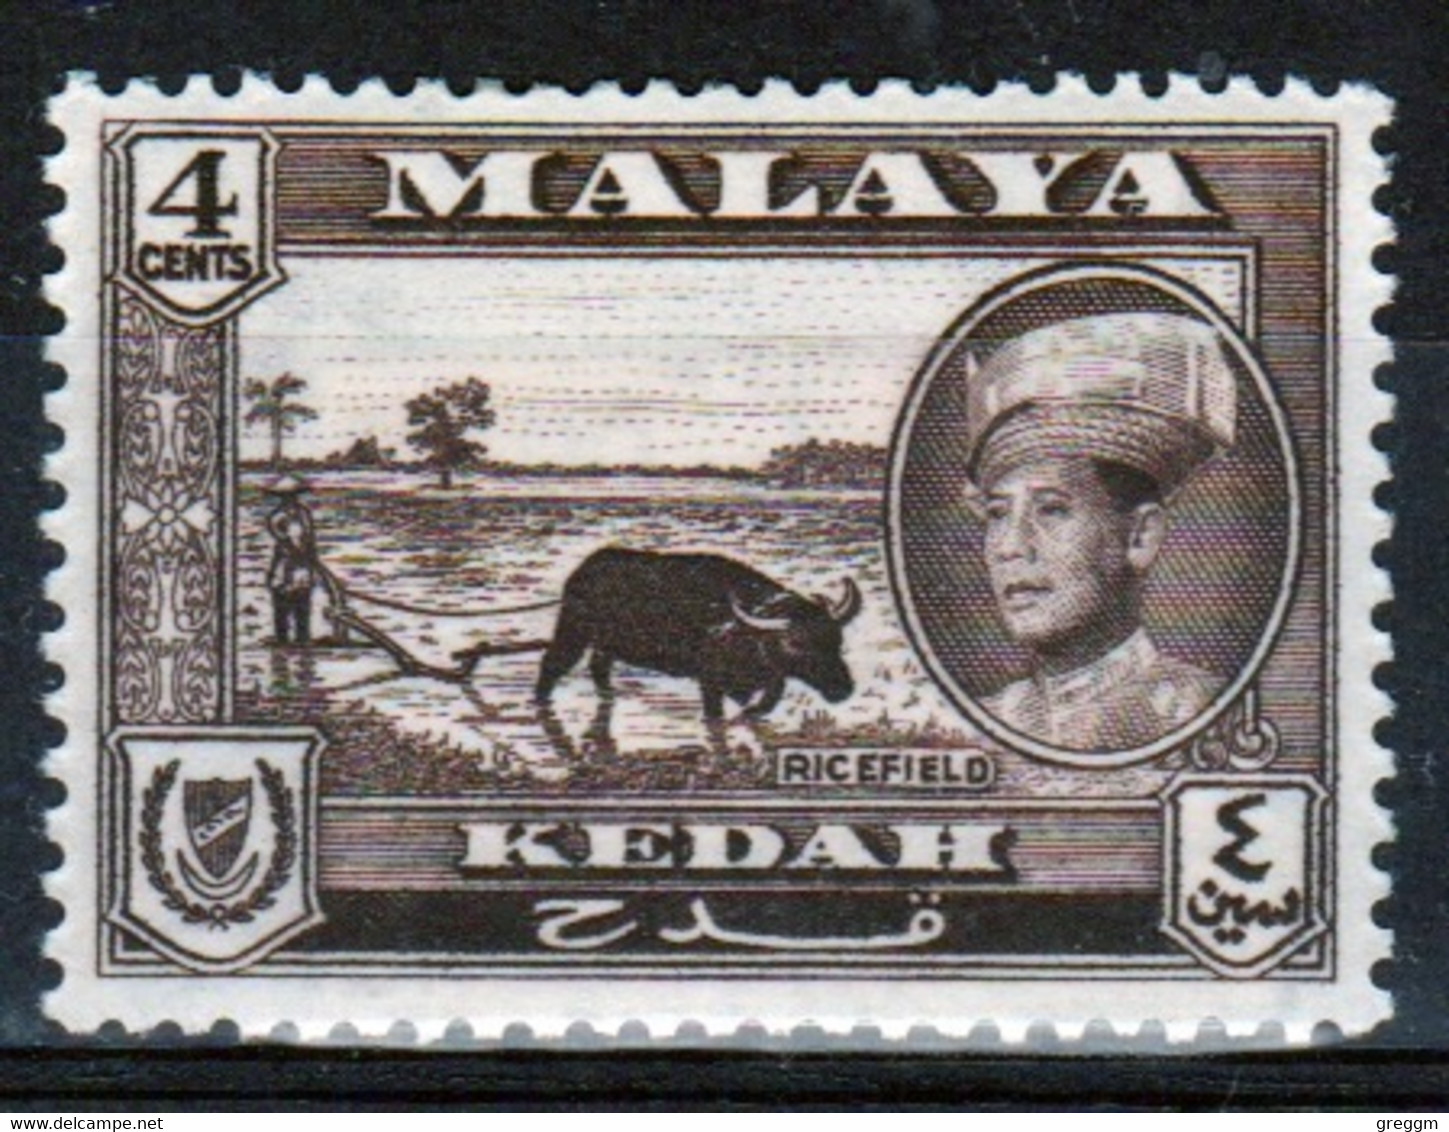 Malaysia Kedah 1959 Single 4c Definitive Stamp Which Is I Believe Cat No 106 In Mounted Mint - Kedah